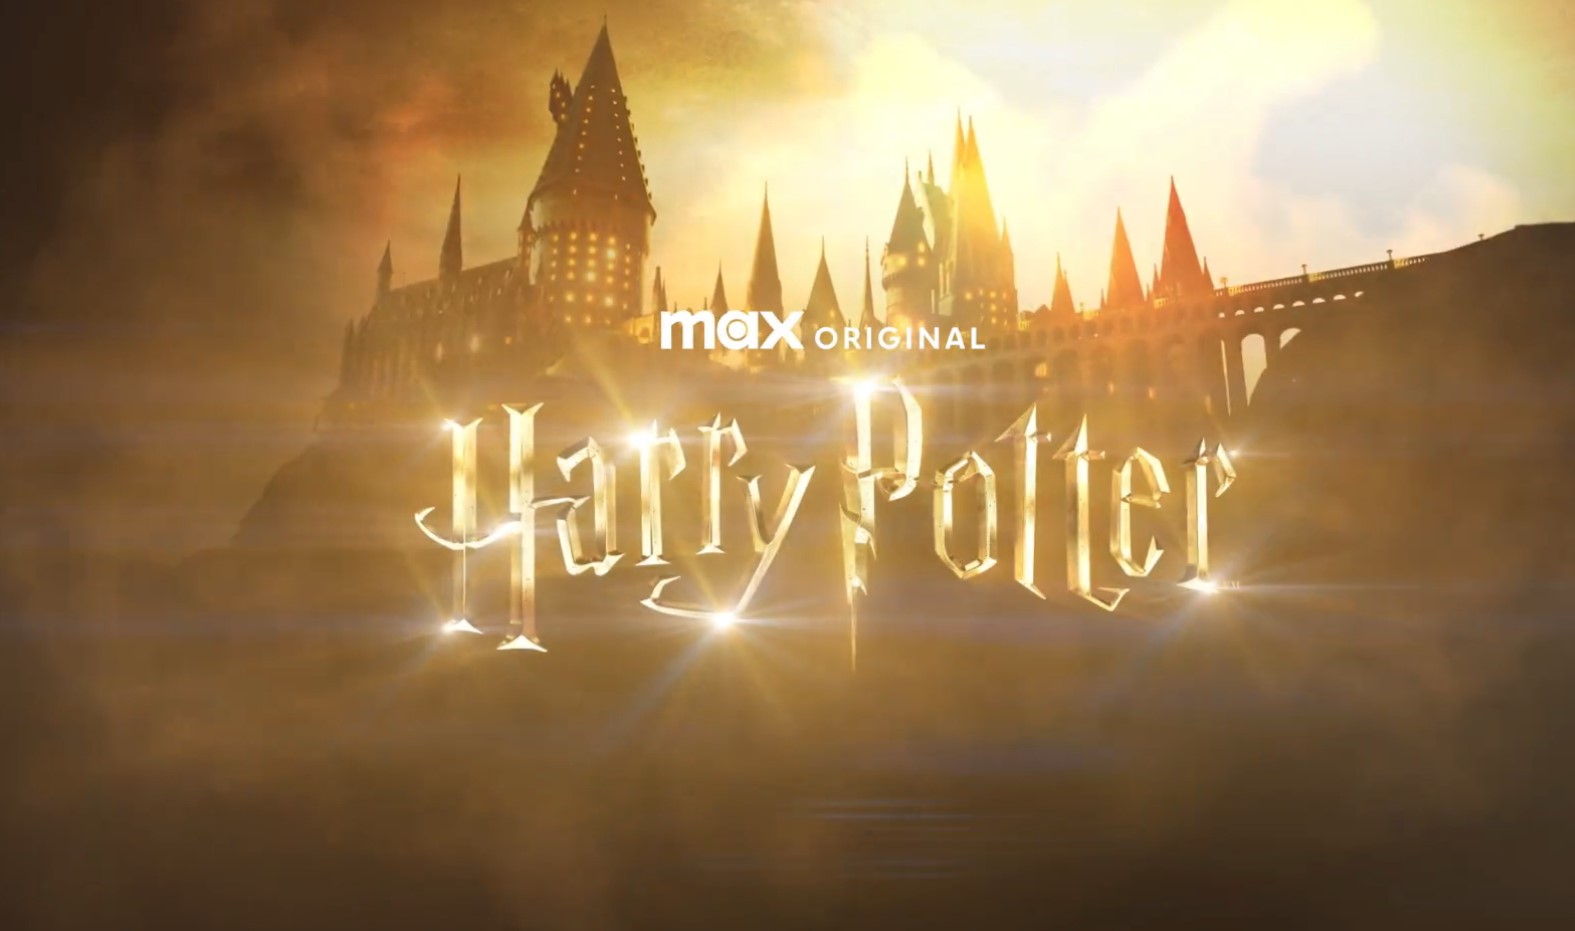 Official! 'Harry Potter' series adaptation ordered at HBO Max